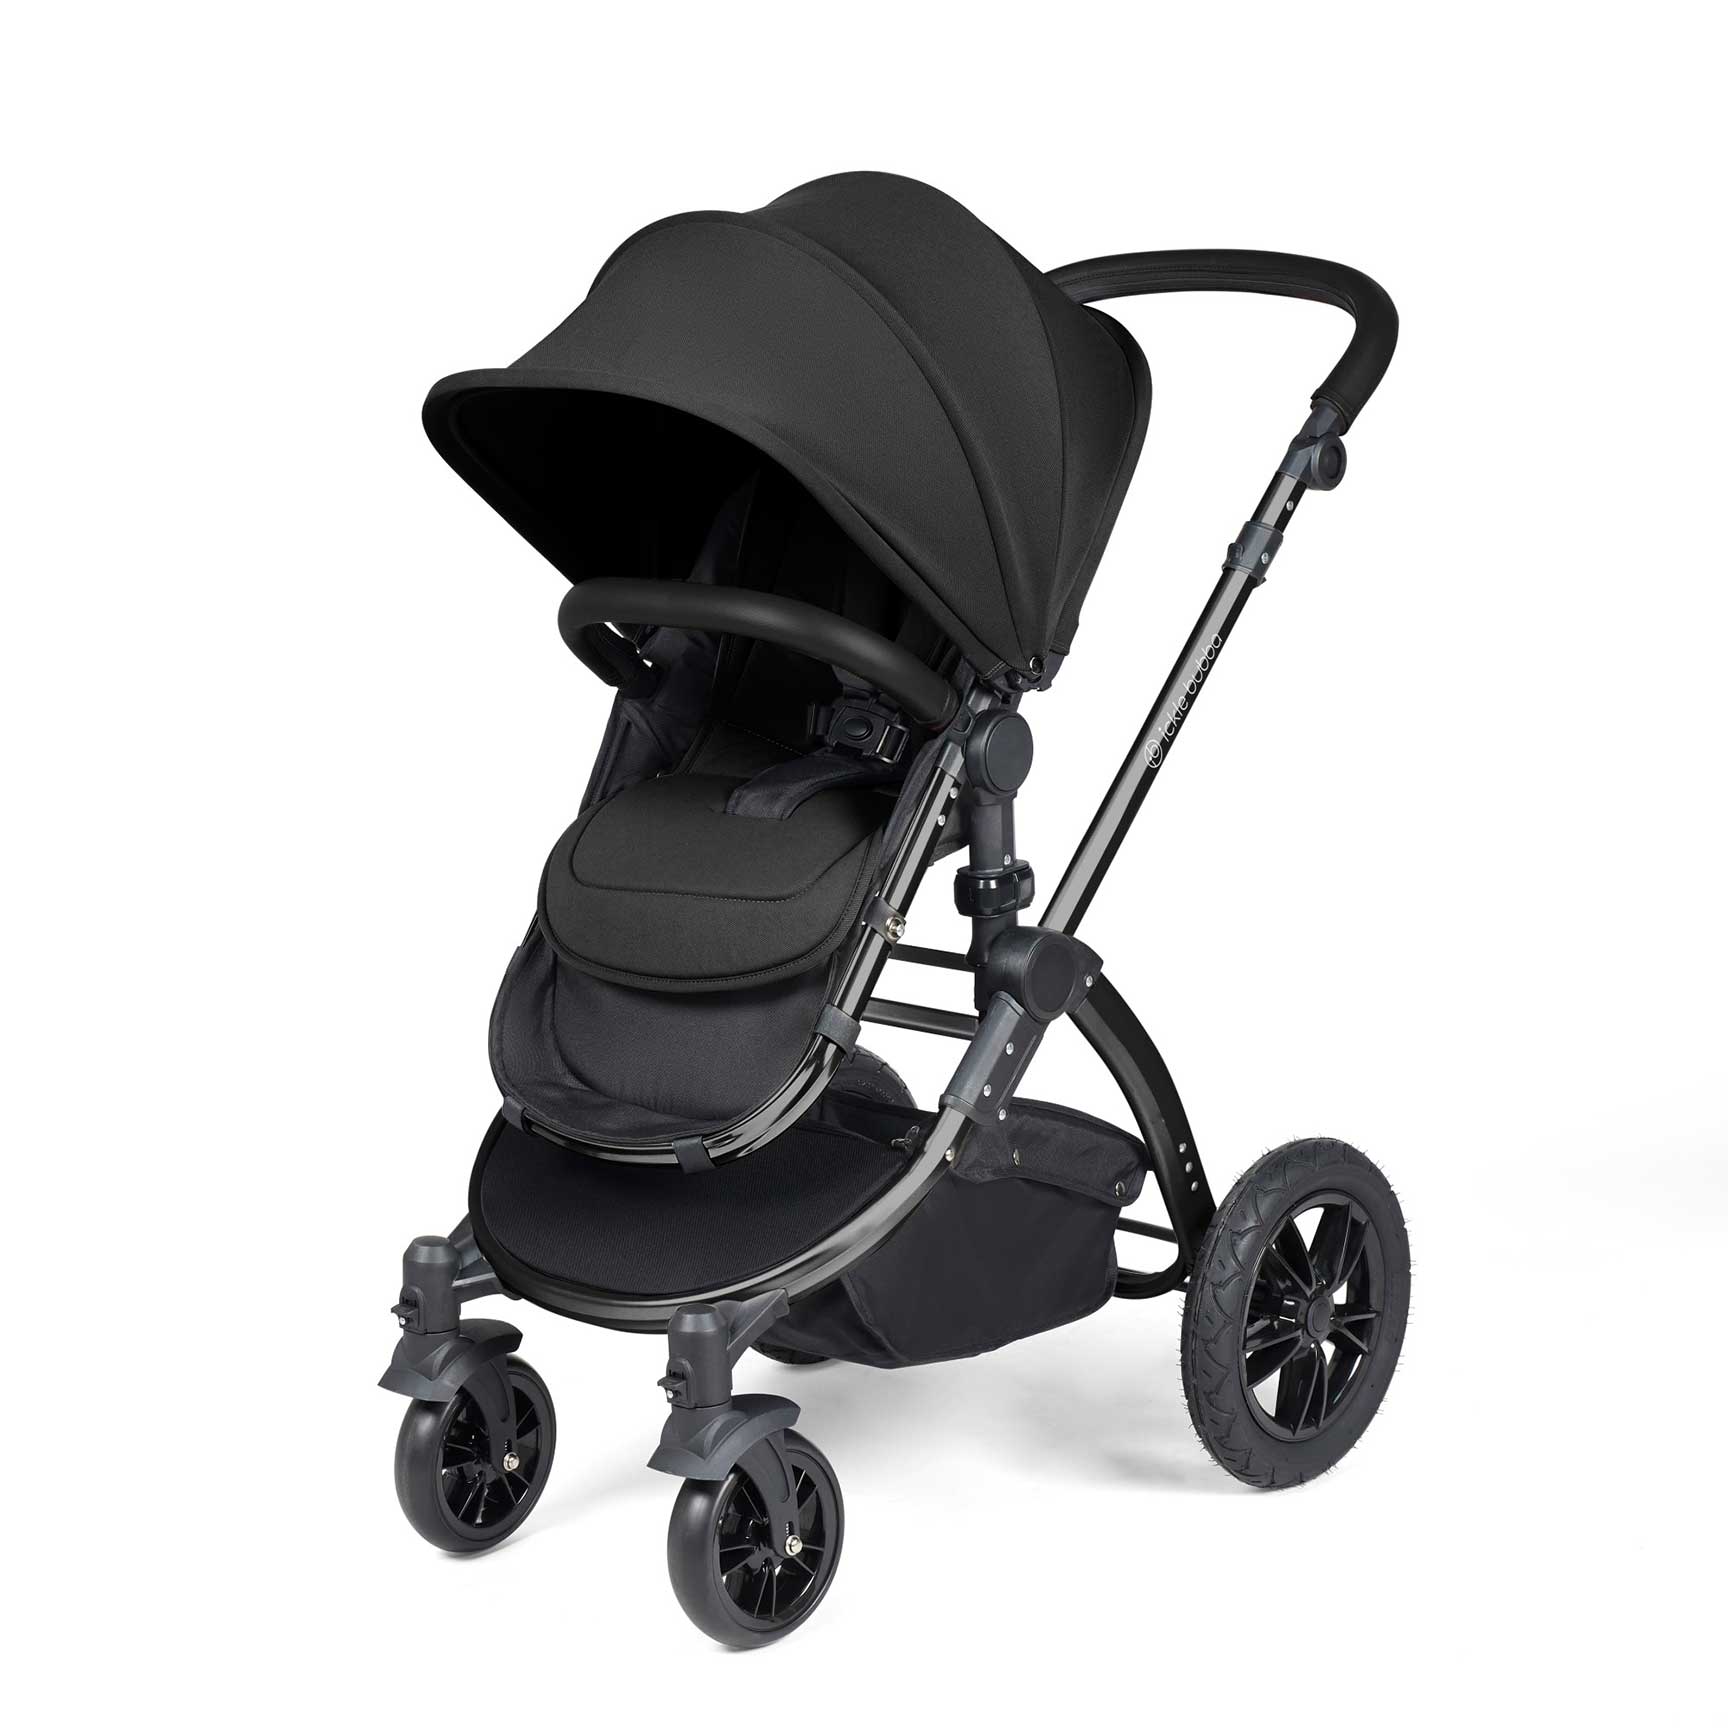 Ickle Bubba Stomp Luxe 2-in-1 Plus Pushchair & Carrycot in Black/Midnight/Black Travel Systems 10-003-001-202 5056515026191